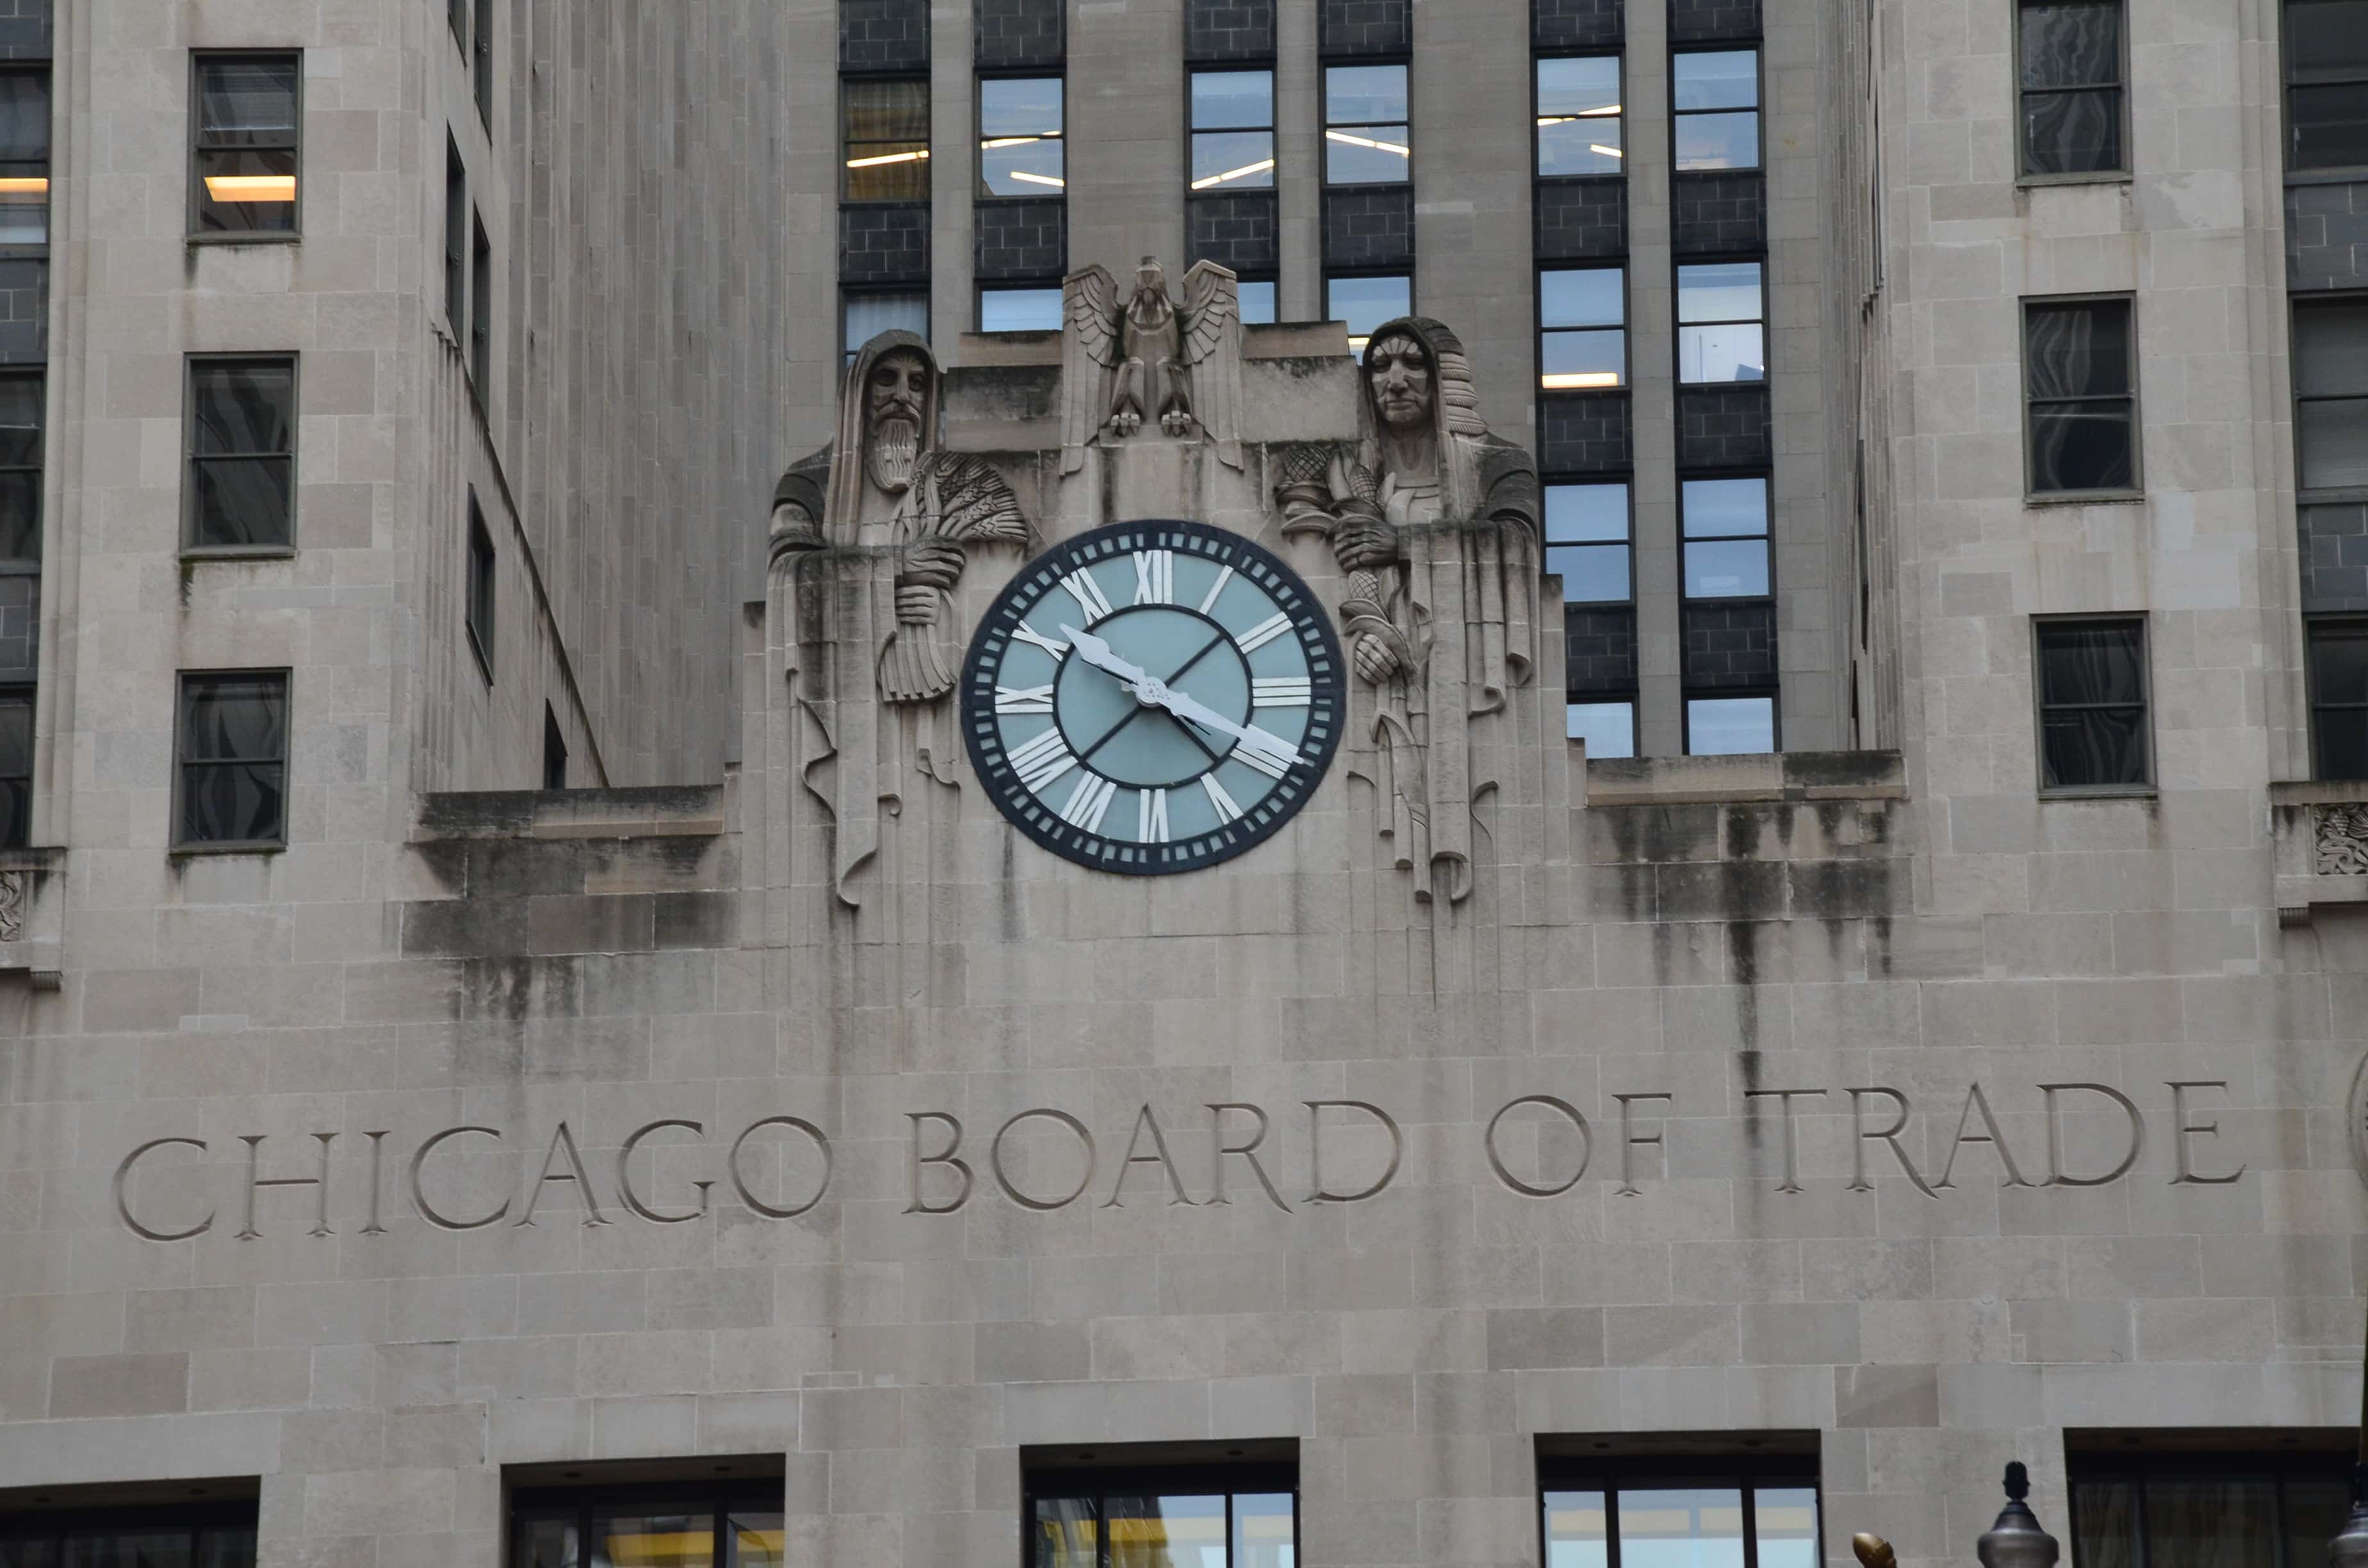 Clock on the Chicago Board of Trade Building in Chicago, Illinois